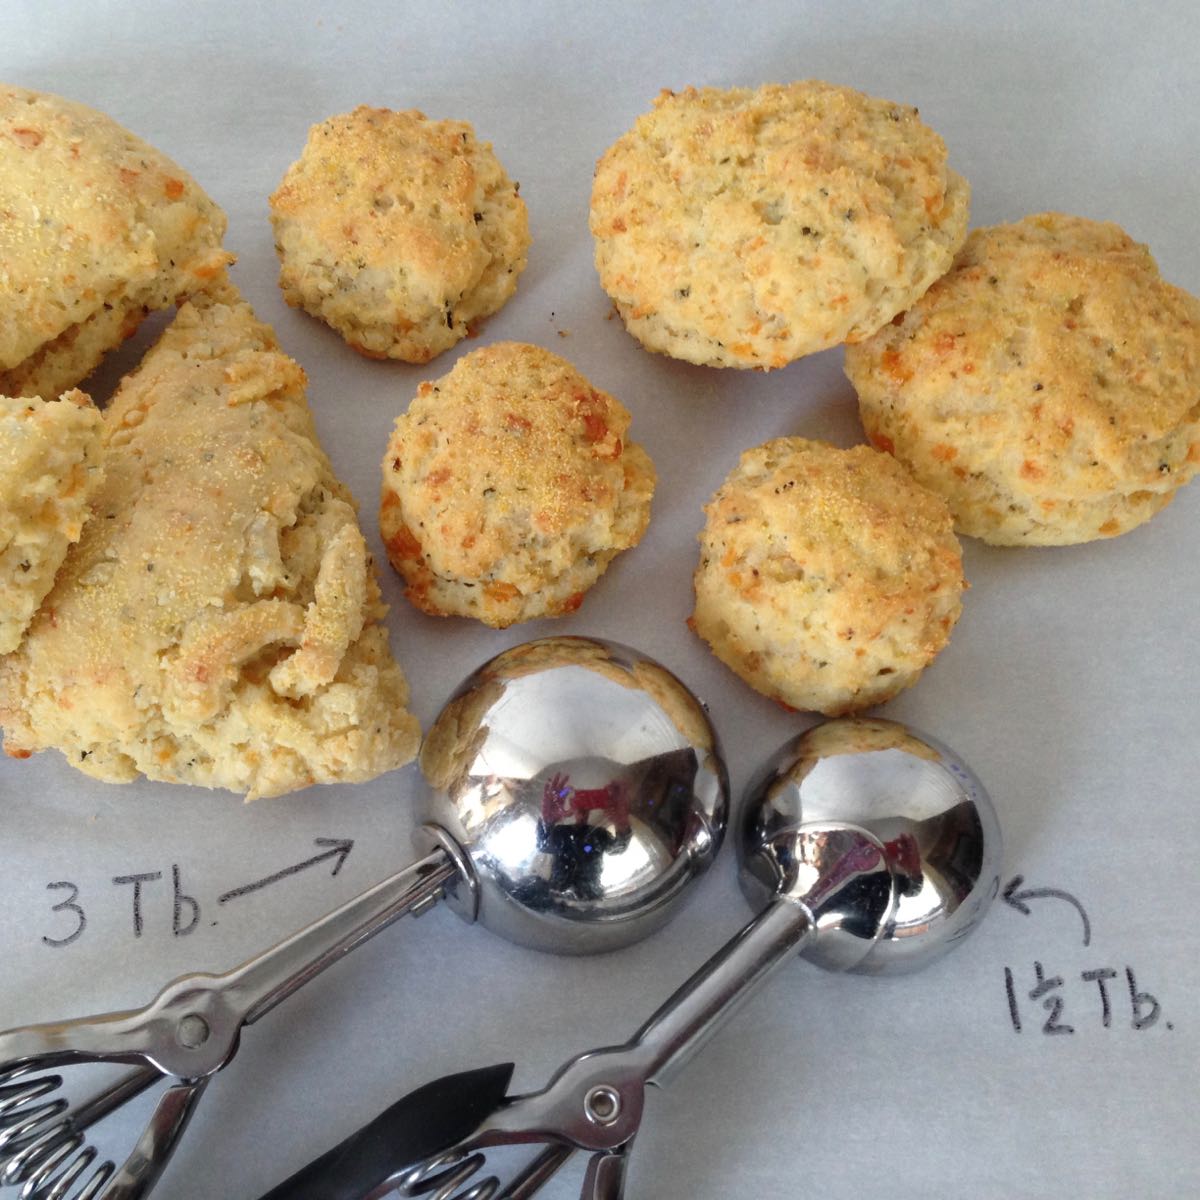 Three sizes of Pesto Cheddar Biscuits: round ones, small appetizer size and larger wedges.